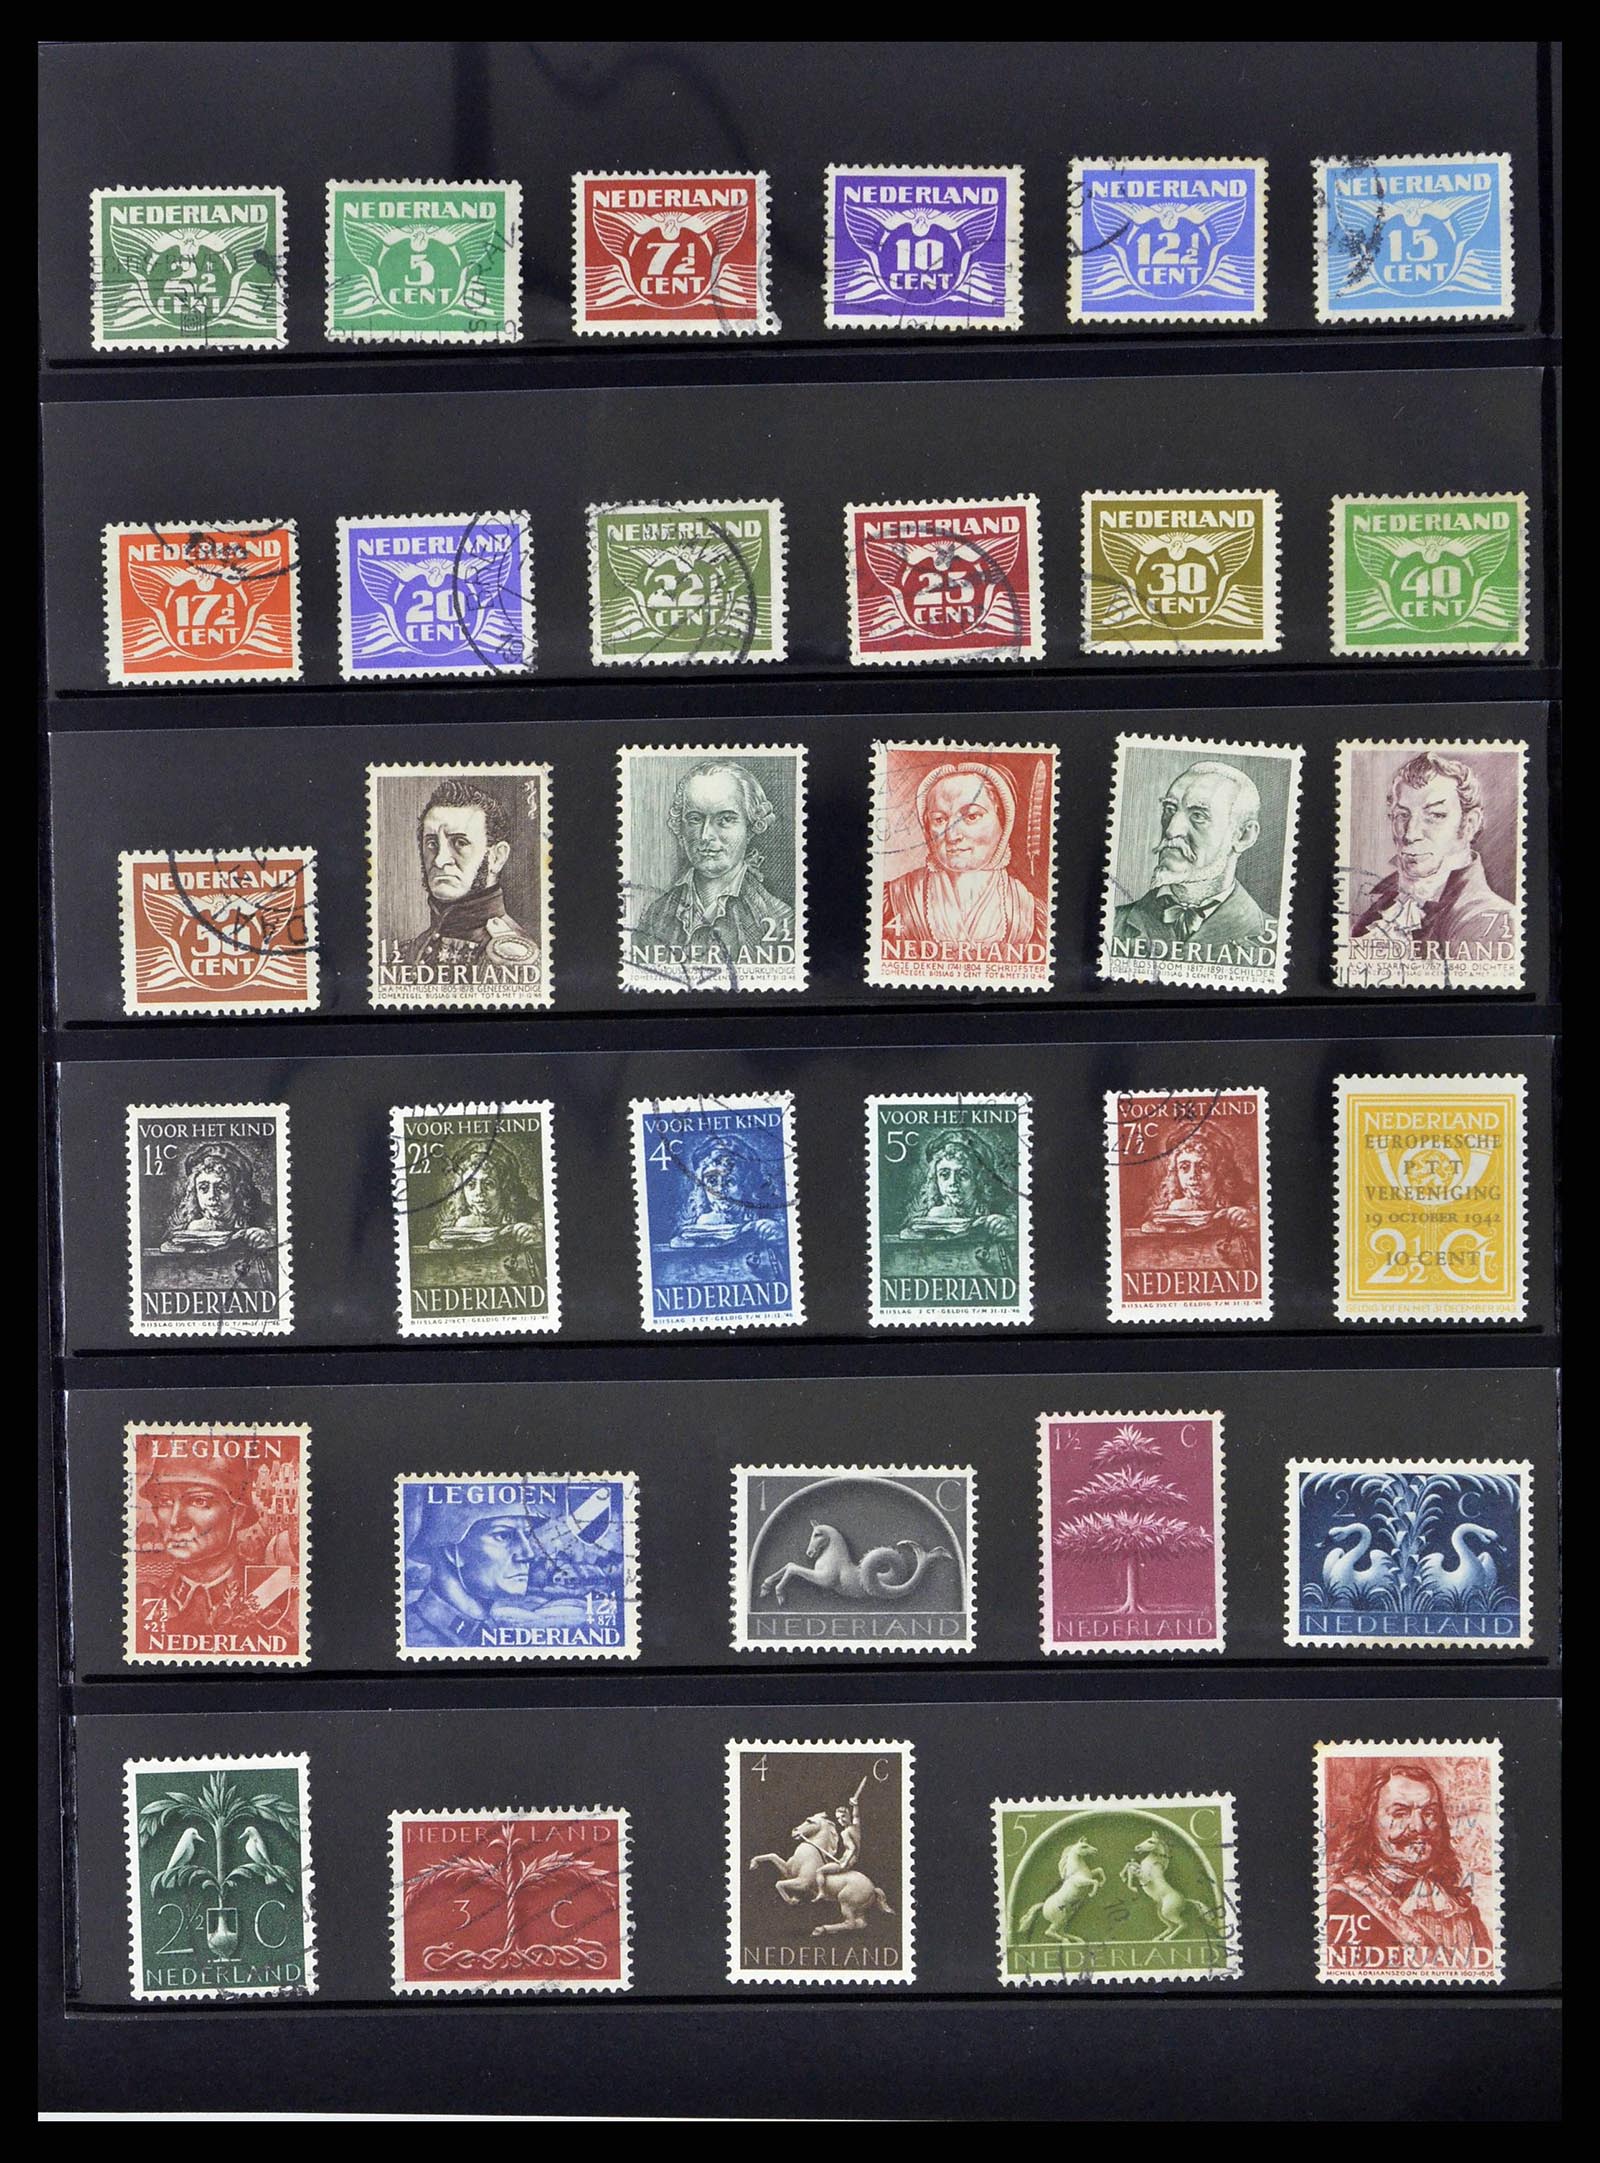 38791 0097 - Stamp collection 38791 Netherlands 1852-2014.